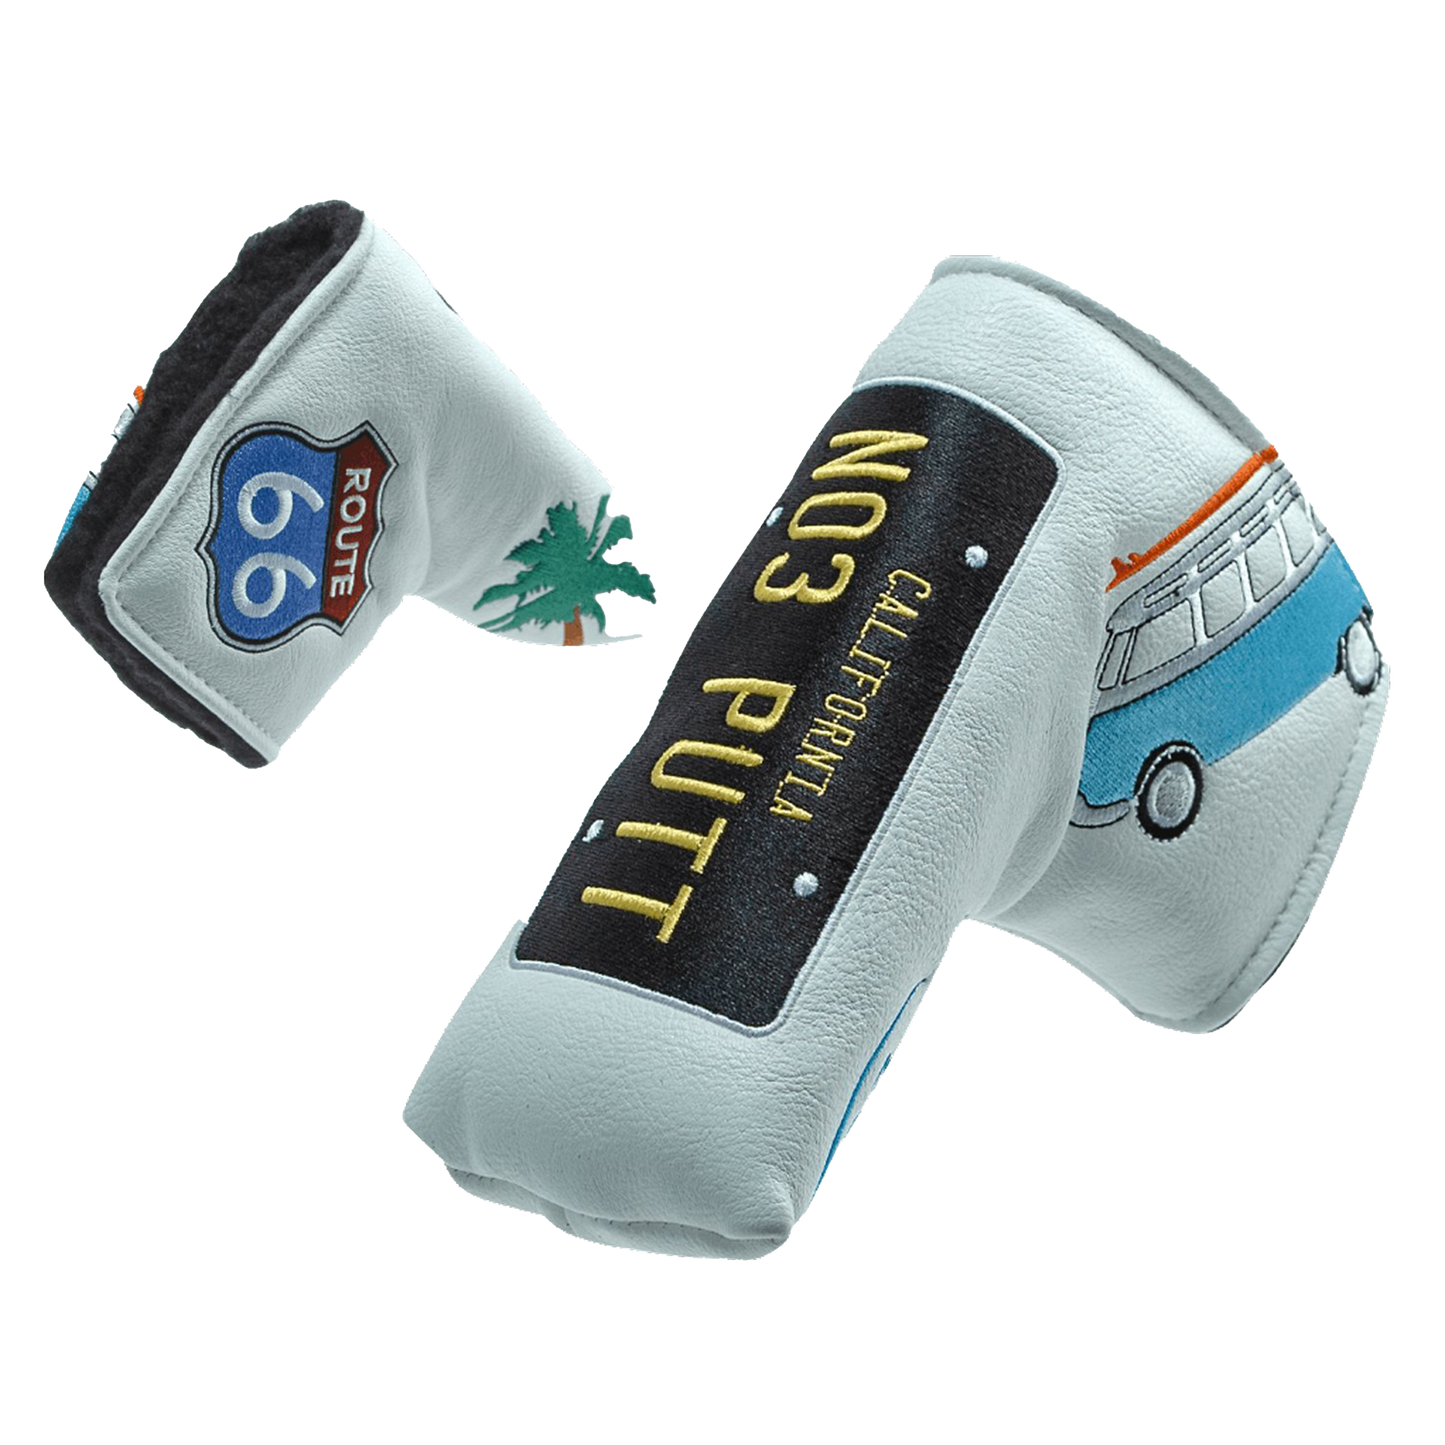 Cali "Route 66" White Blade Putter Cover